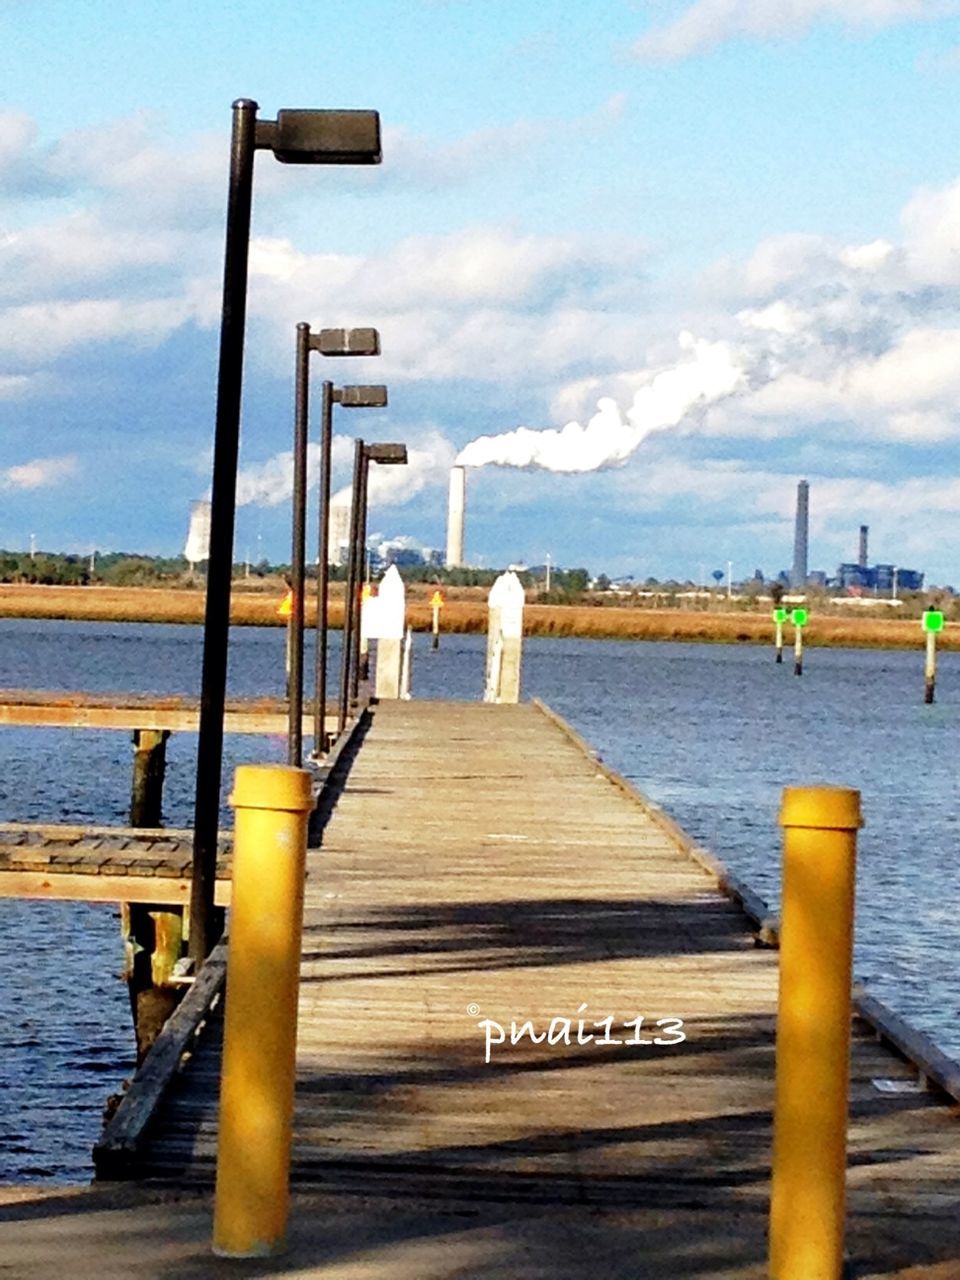 water, pier, sky, sea, railing, the way forward, jetty, transportation, wood - material, cloud - sky, tranquility, tranquil scene, nautical vessel, cloud, lake, nature, wood, scenics, built structure, mode of transport